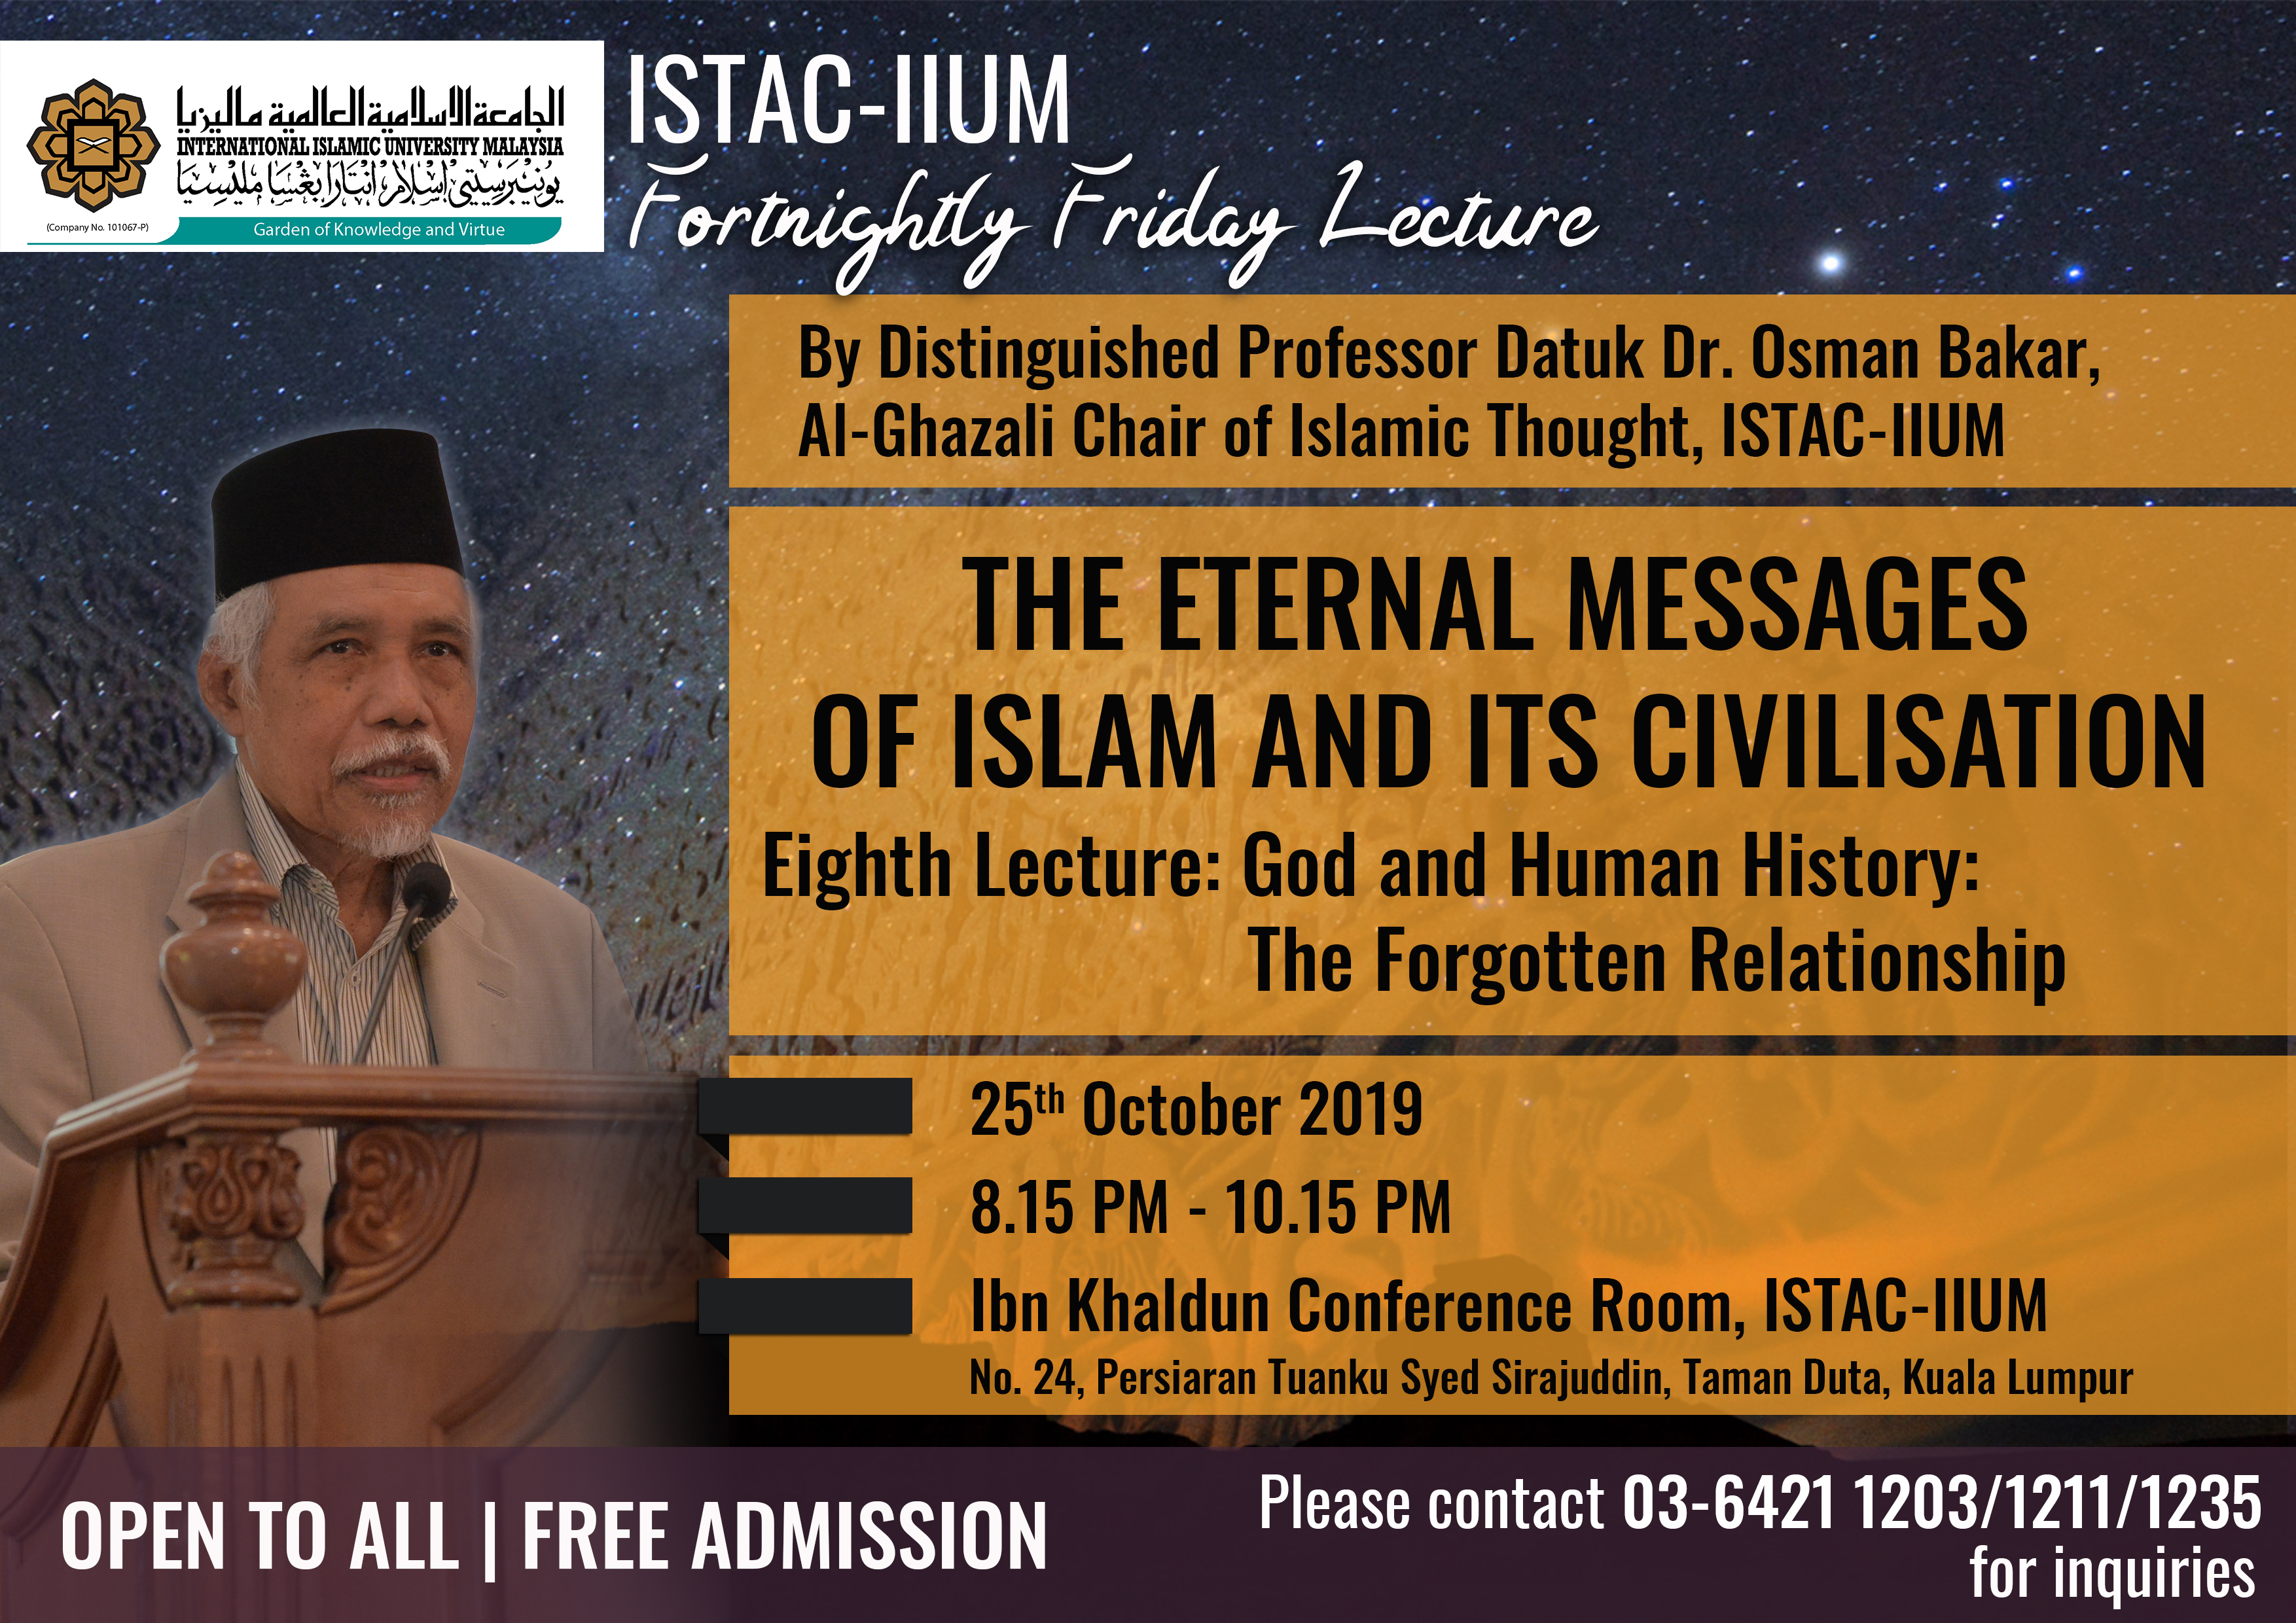 ISTAC-IIUM FORTNIGHTLY FRIDAY LECTURE